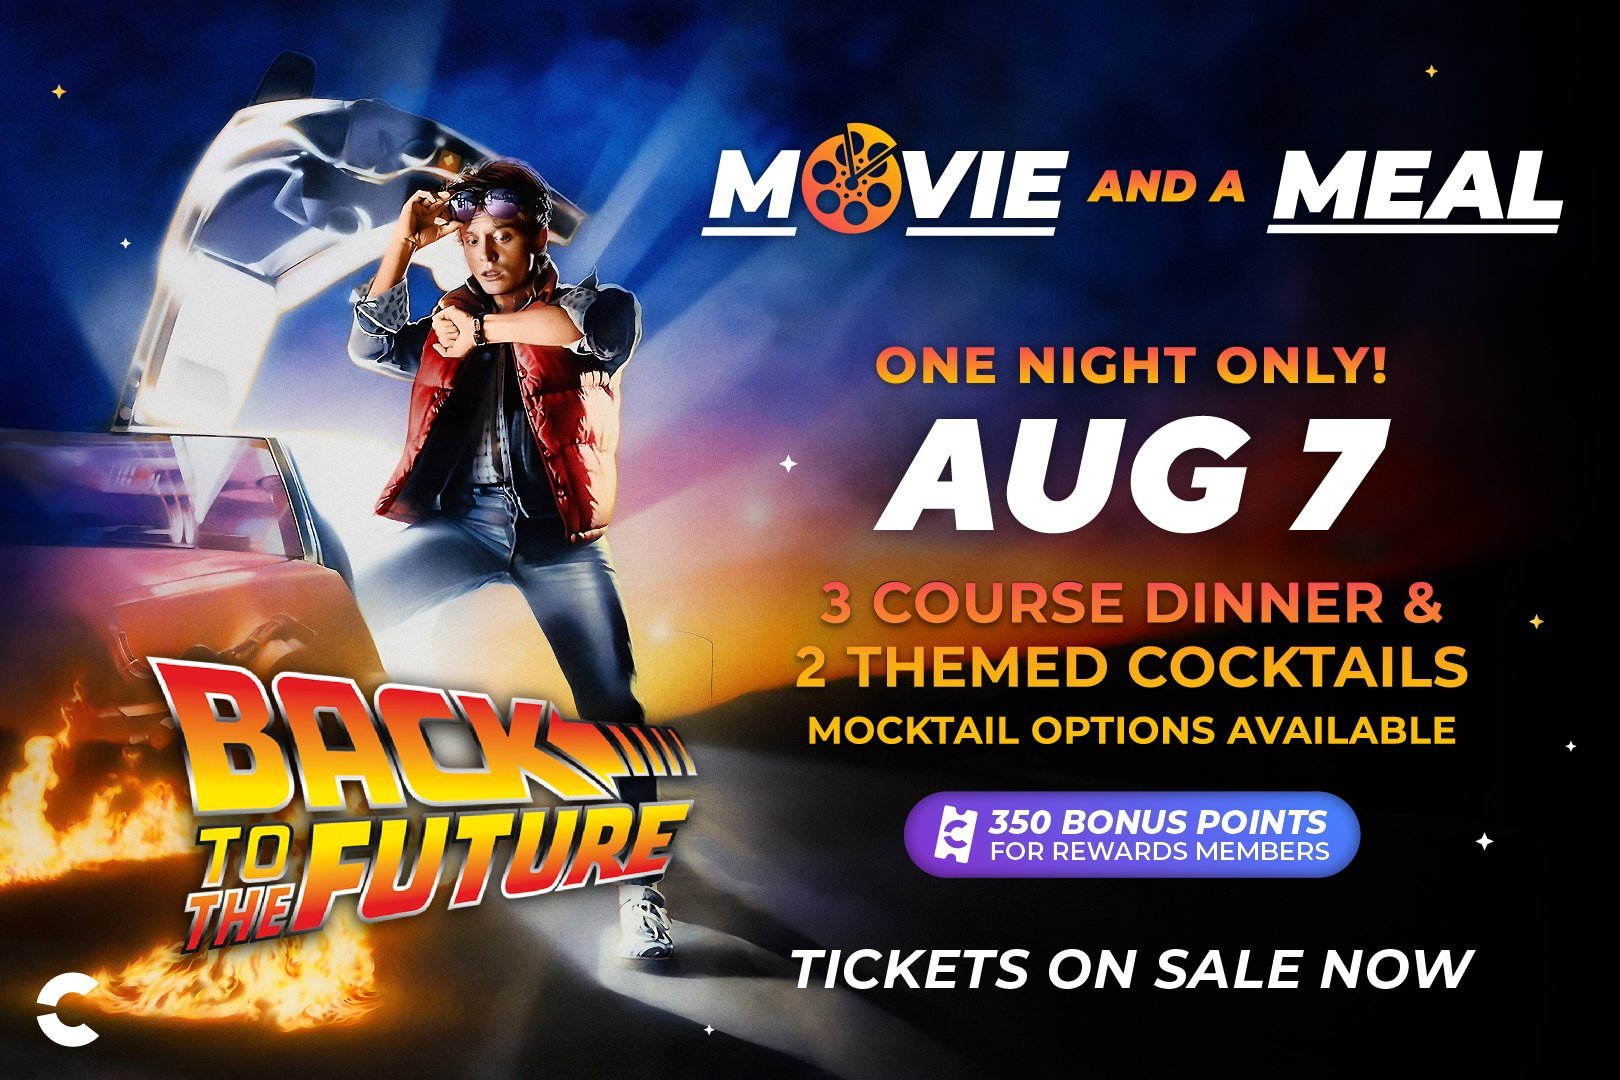 Join us at Cinepolis and Moviehouse for a Back to the Future themed dinner and a movie